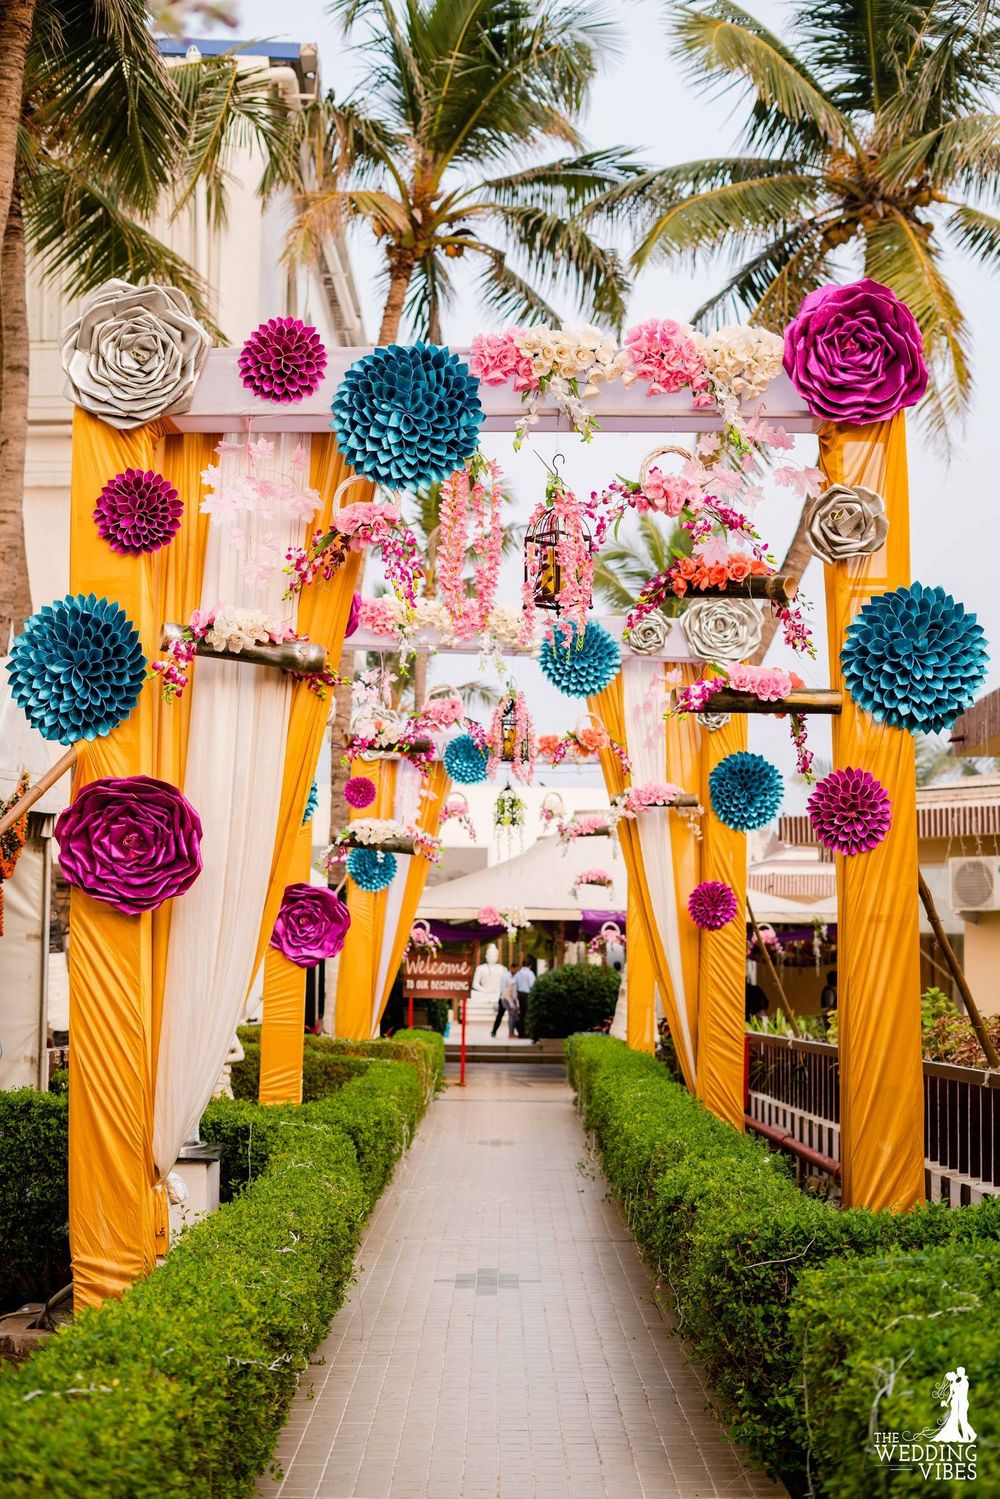 Photo of Entrance decor idea with giant paper flowers